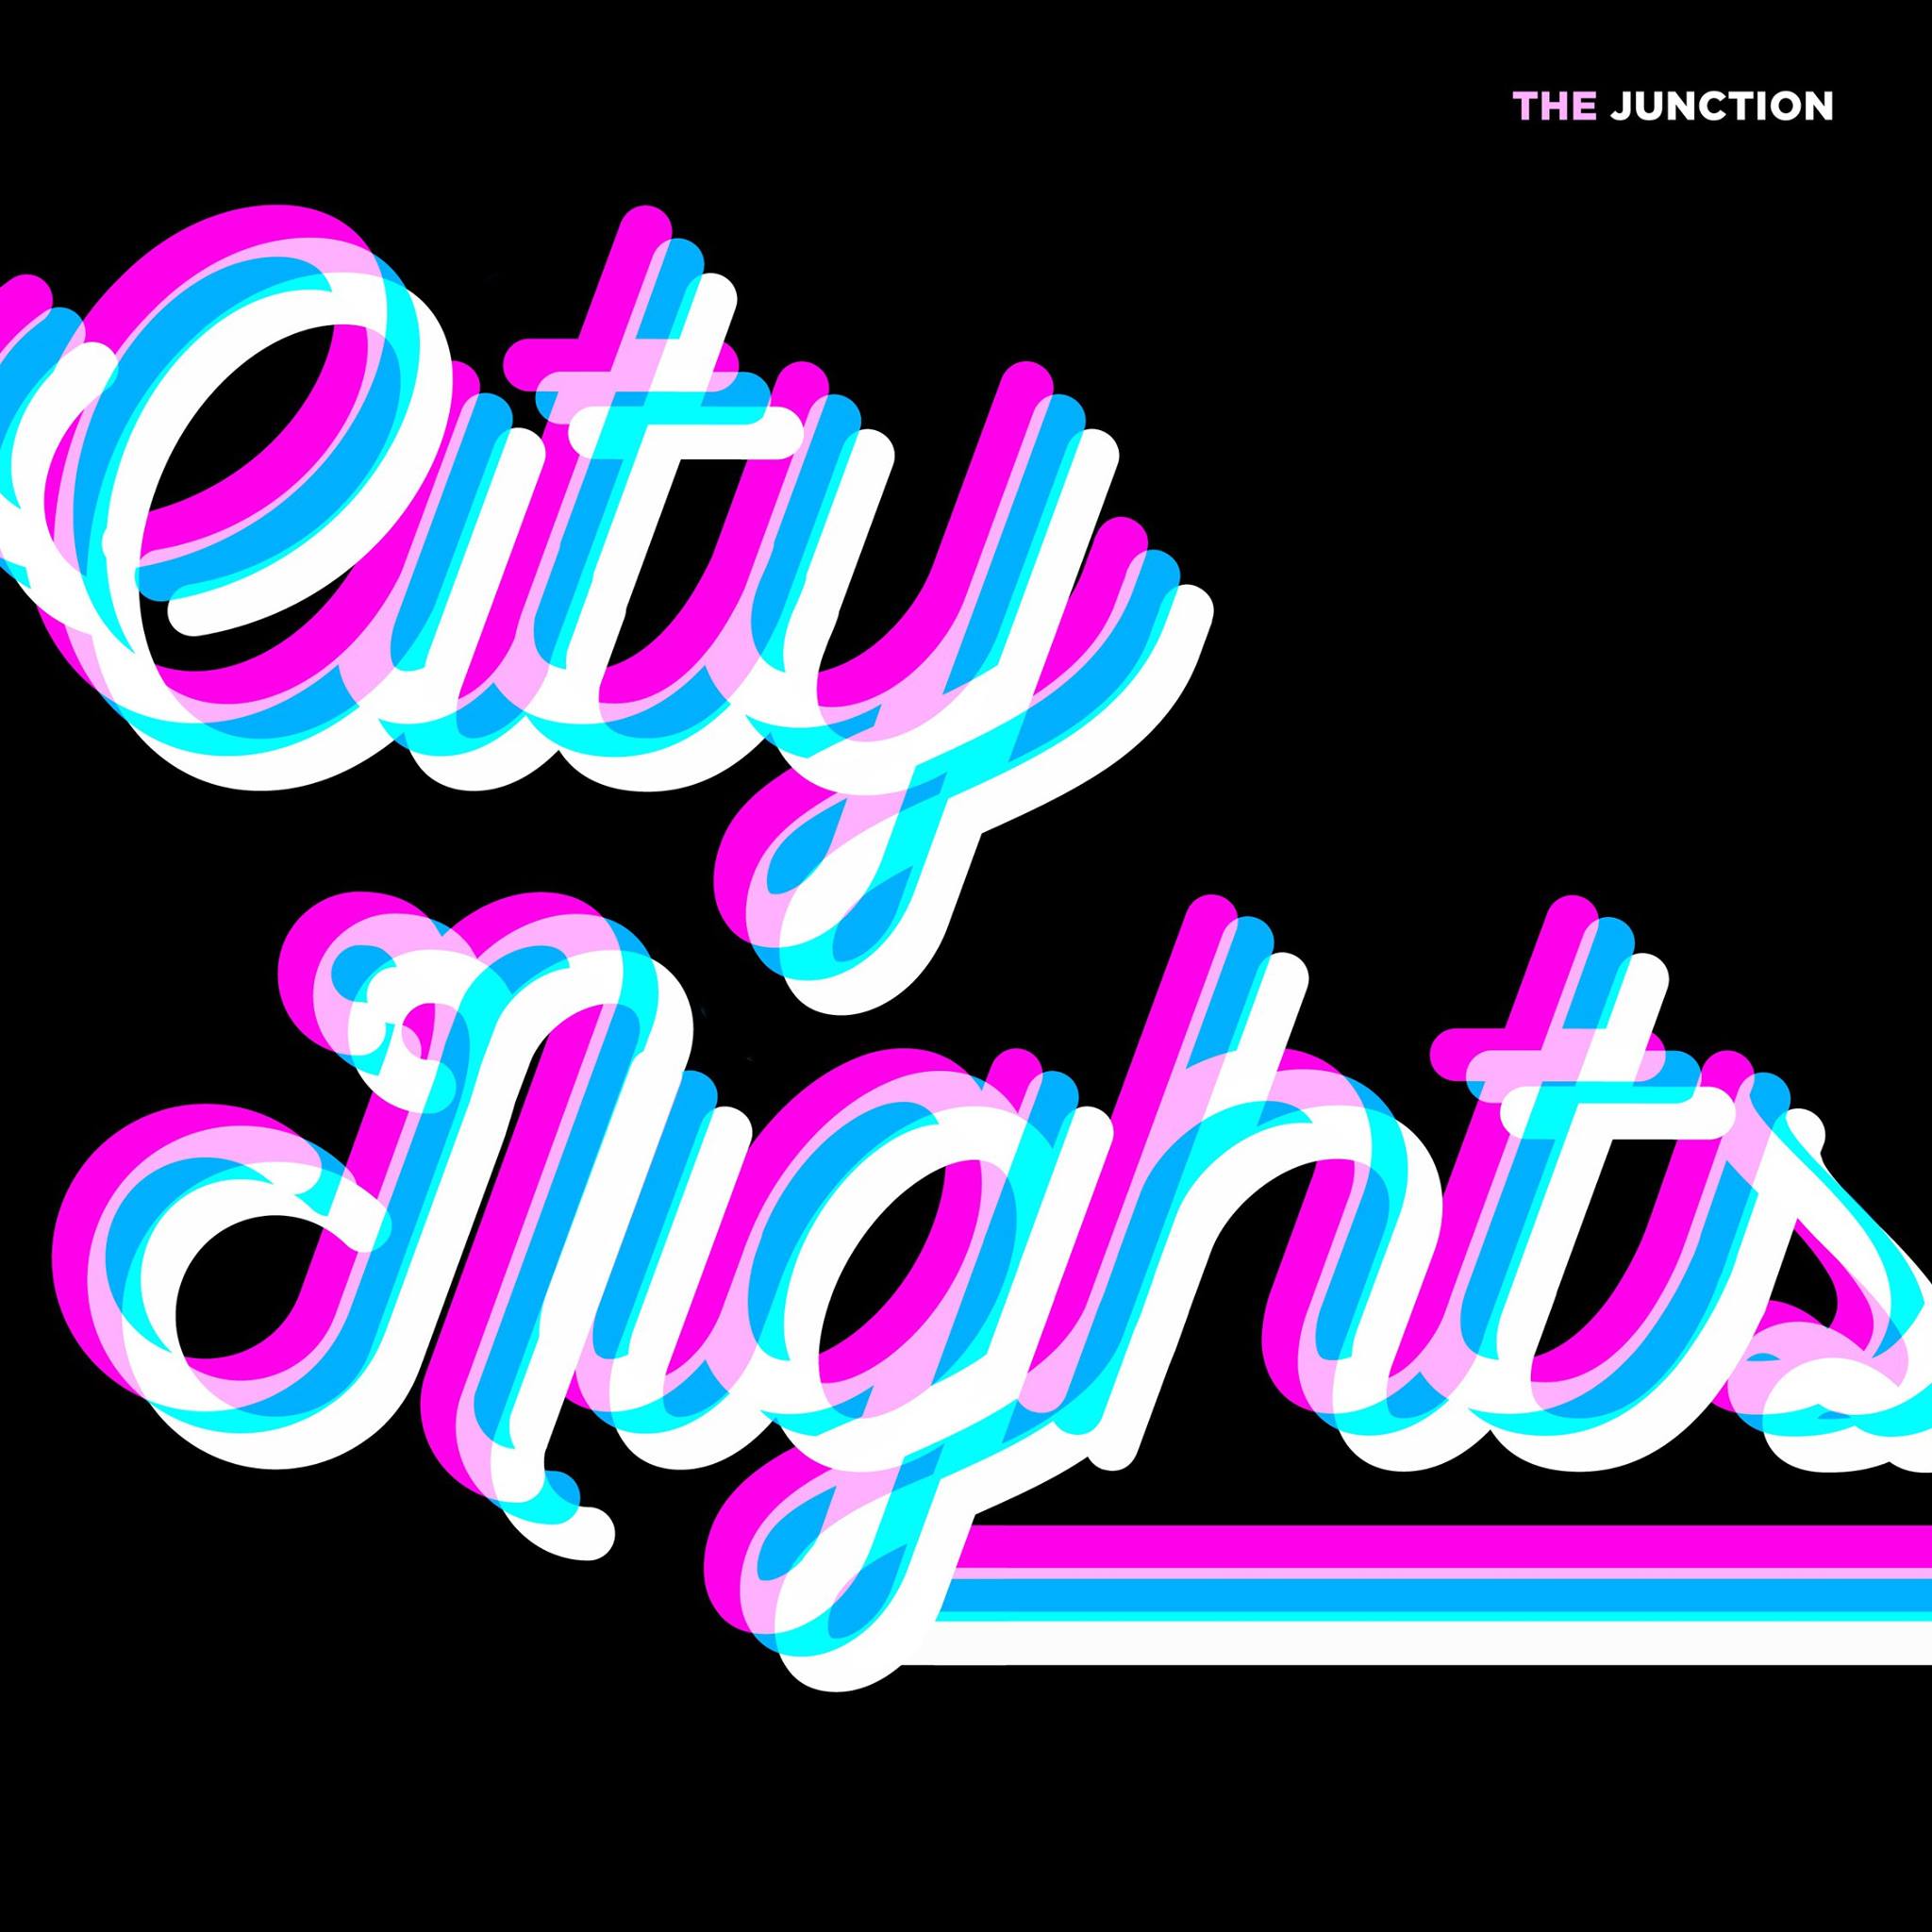 The Junction – “City Nights”